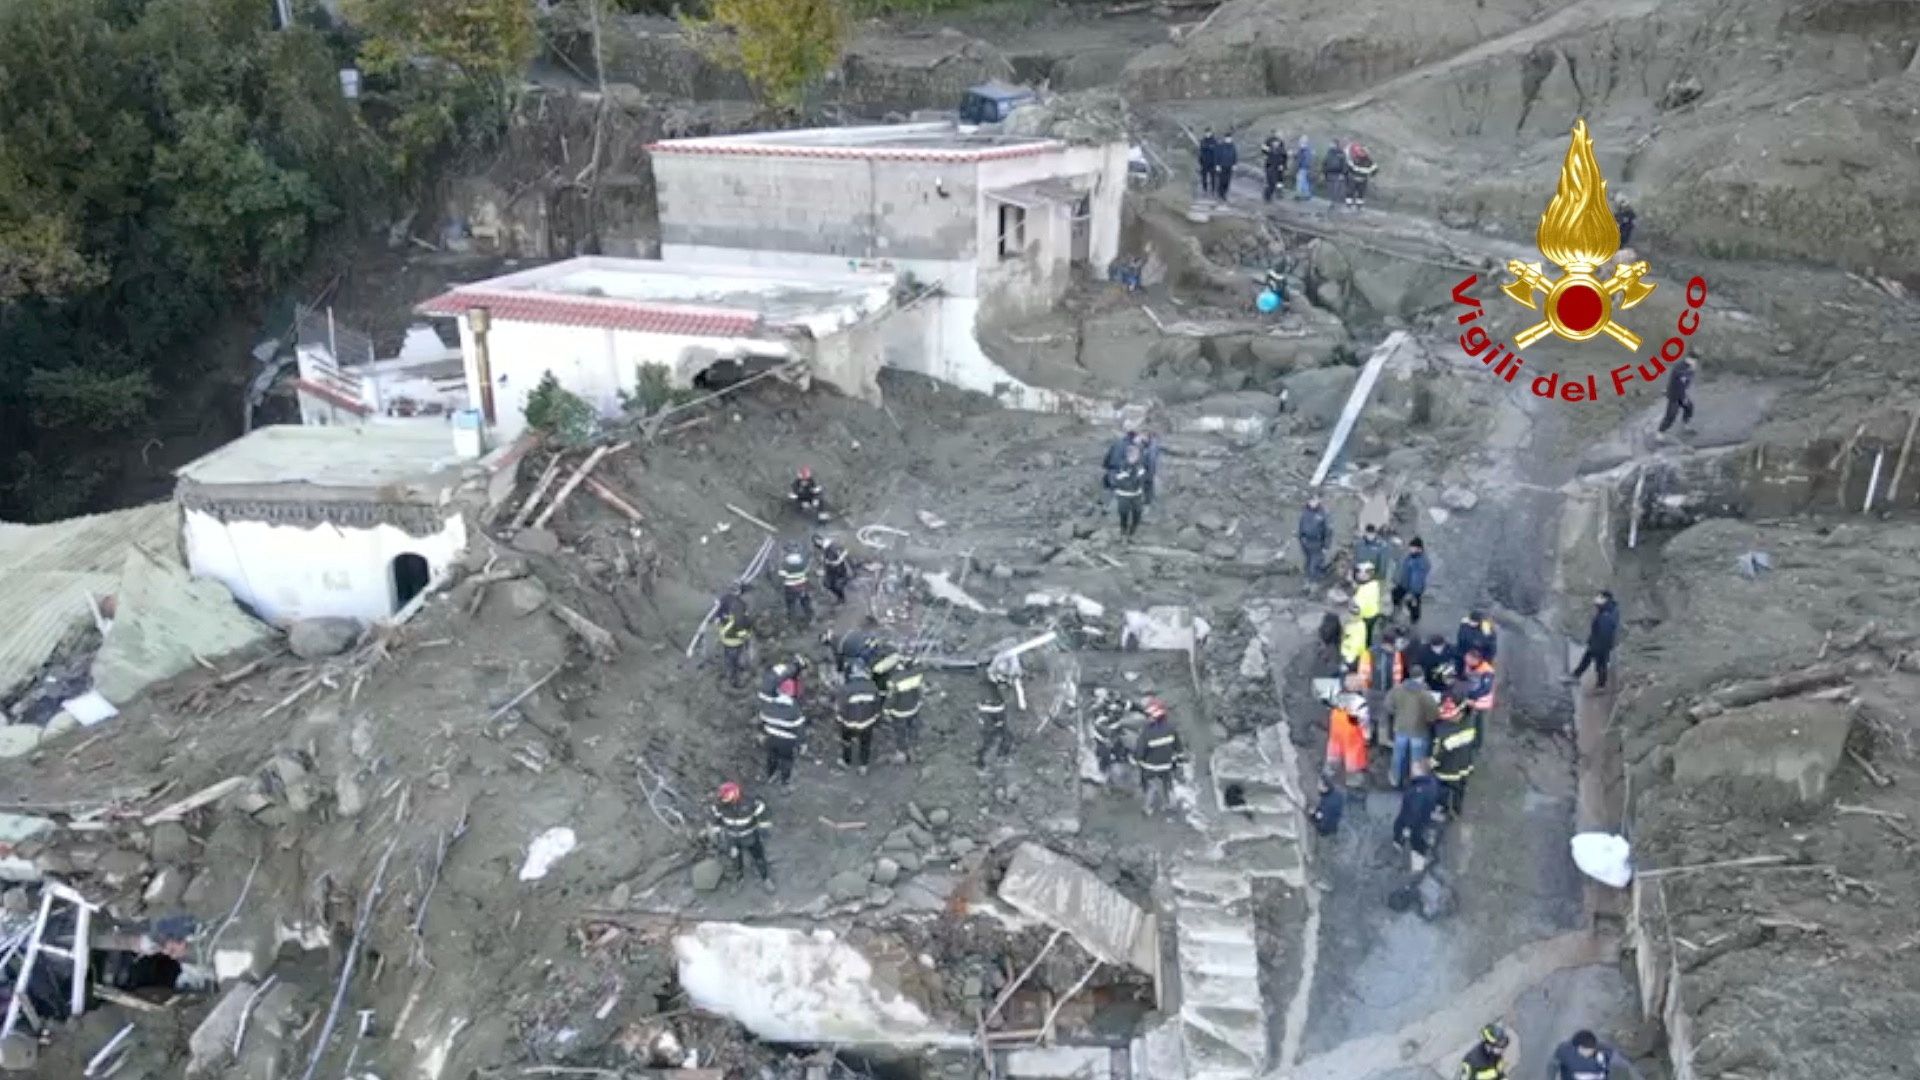 An aerial view shows rescuers searching for missing people after a landslide on the Italian island of Ischia, Italy.